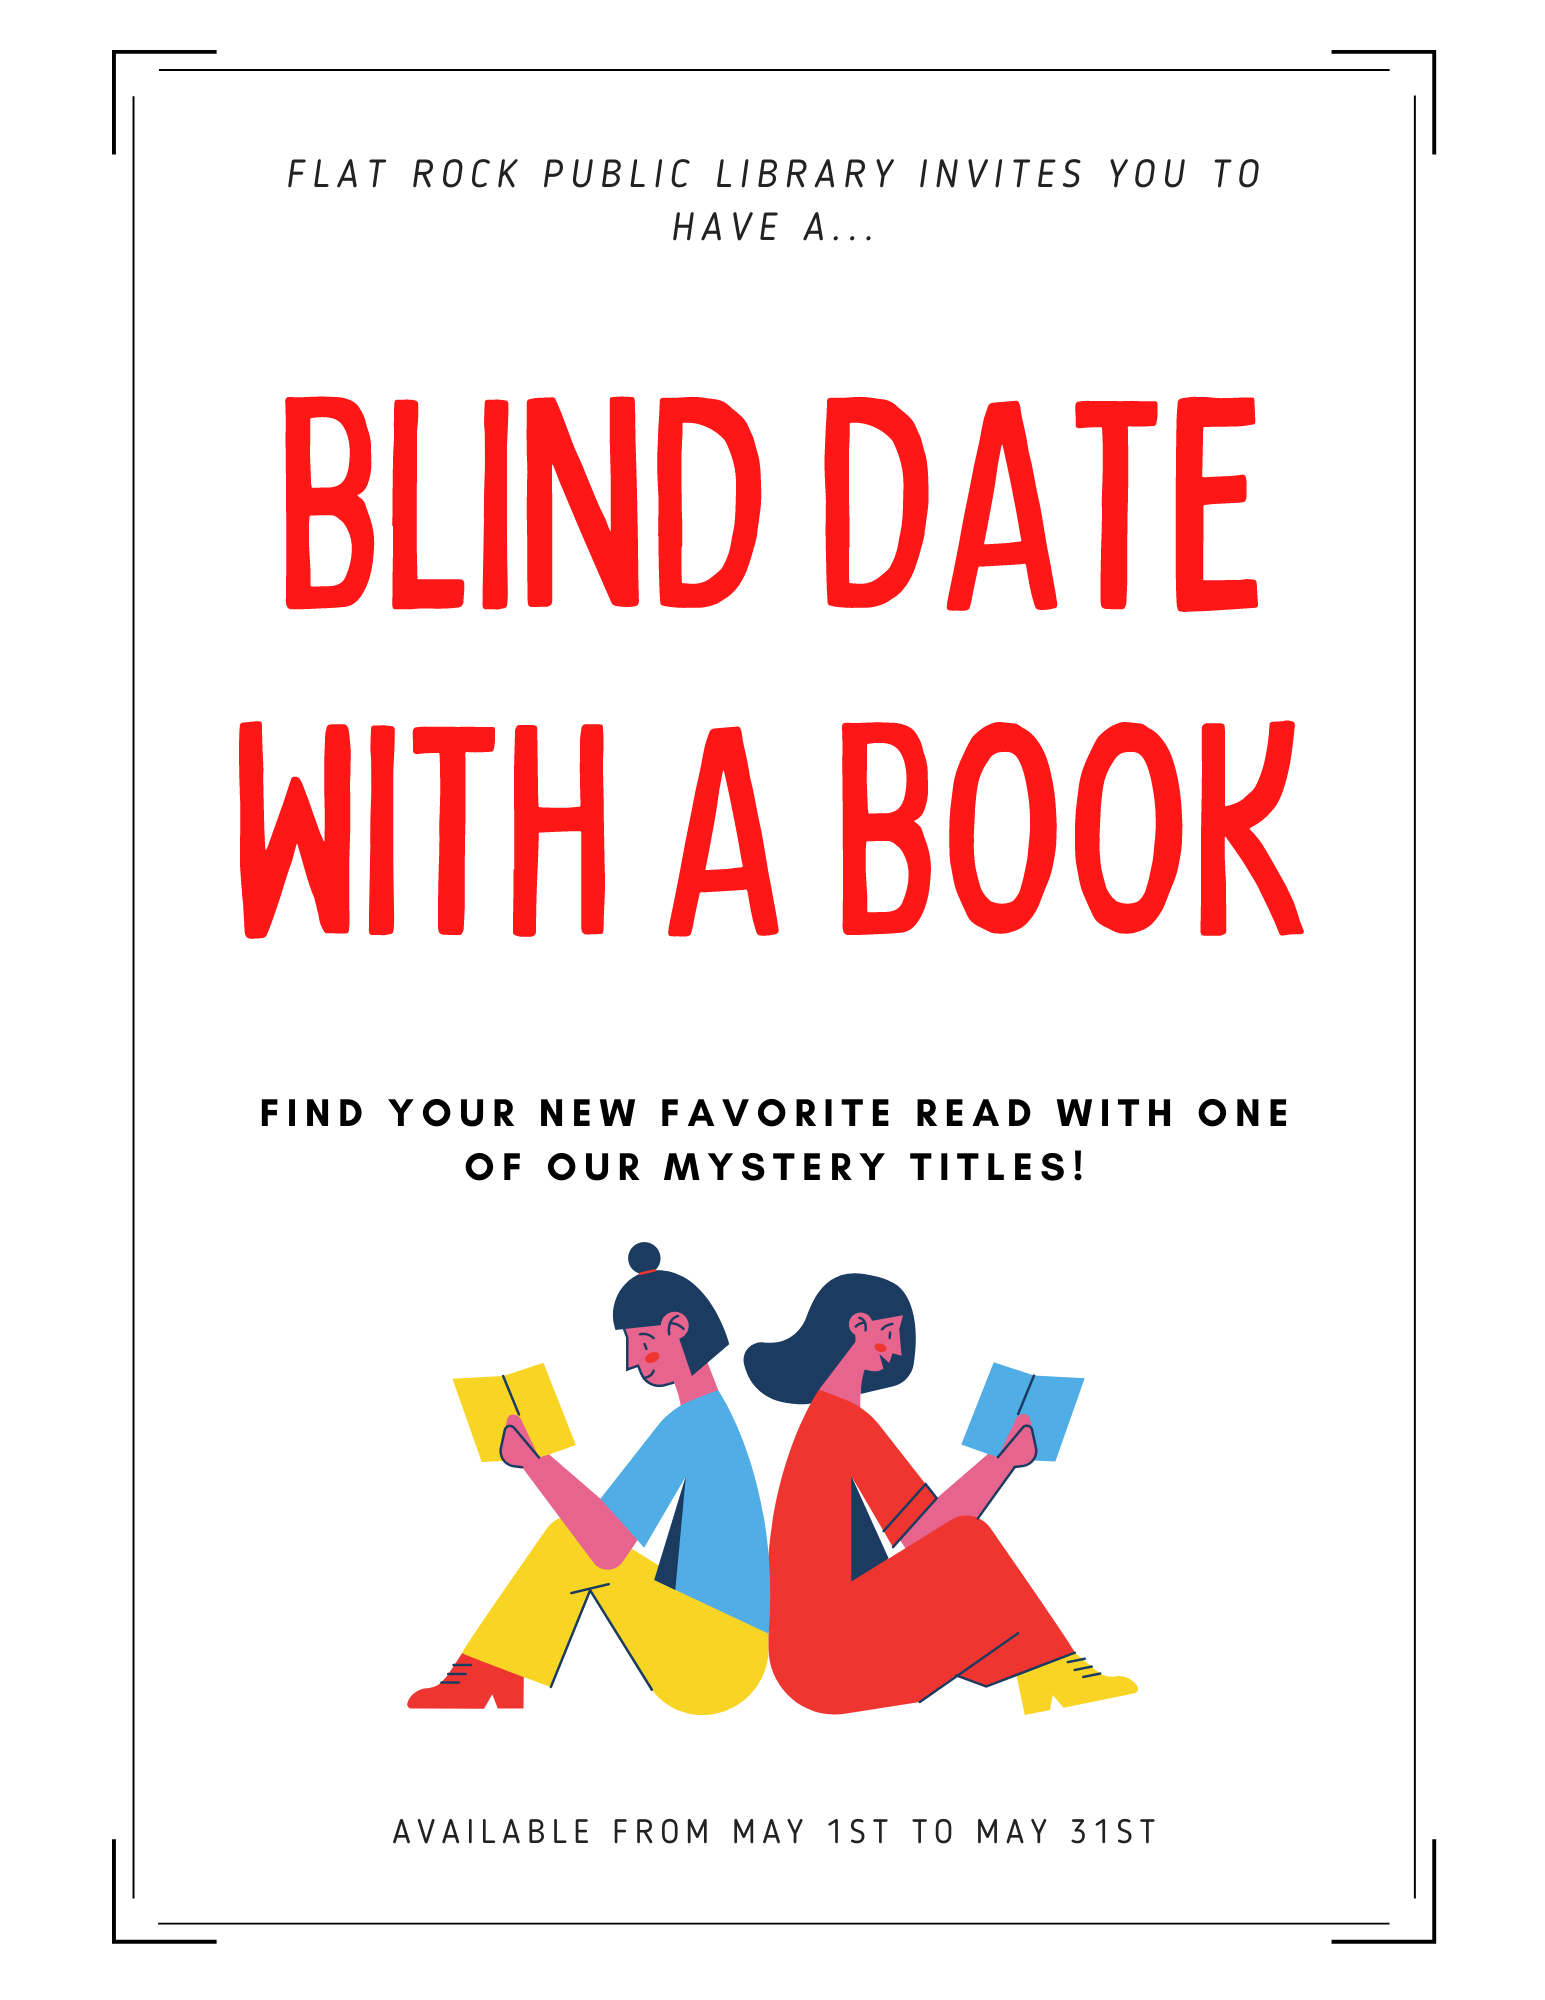 blind date with a book flyer.png